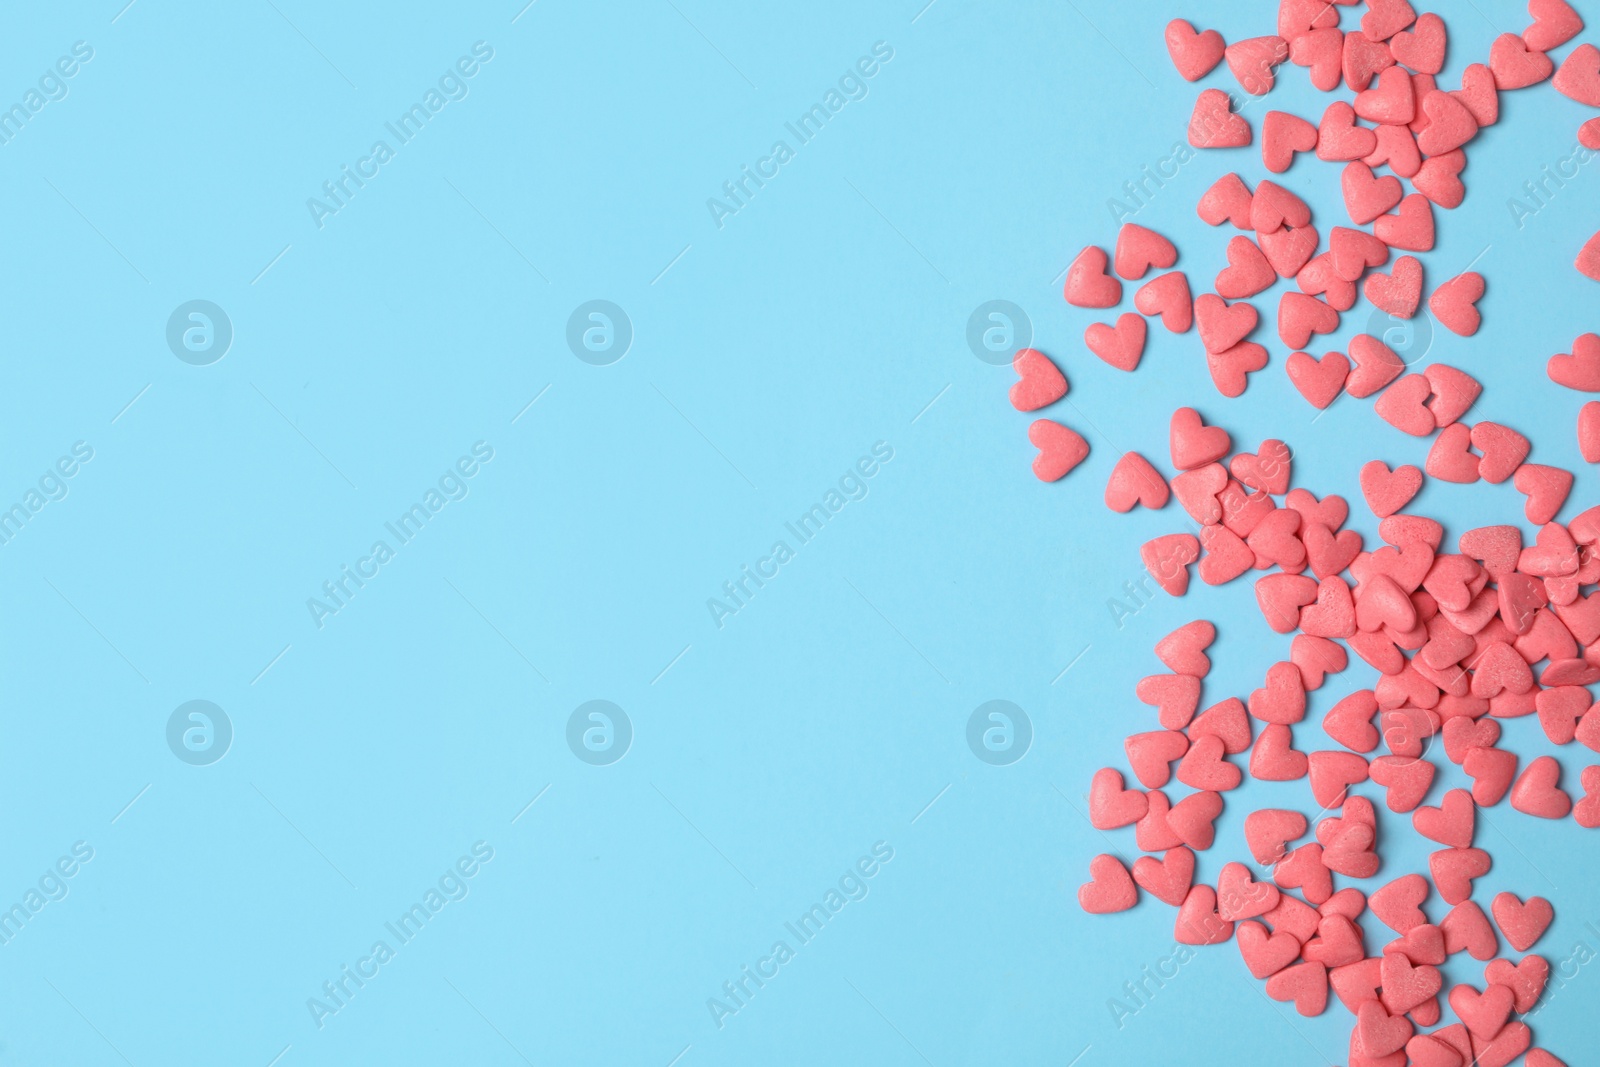 Photo of Bright heart shaped sprinkles on light blue background, flat lay. Space for text